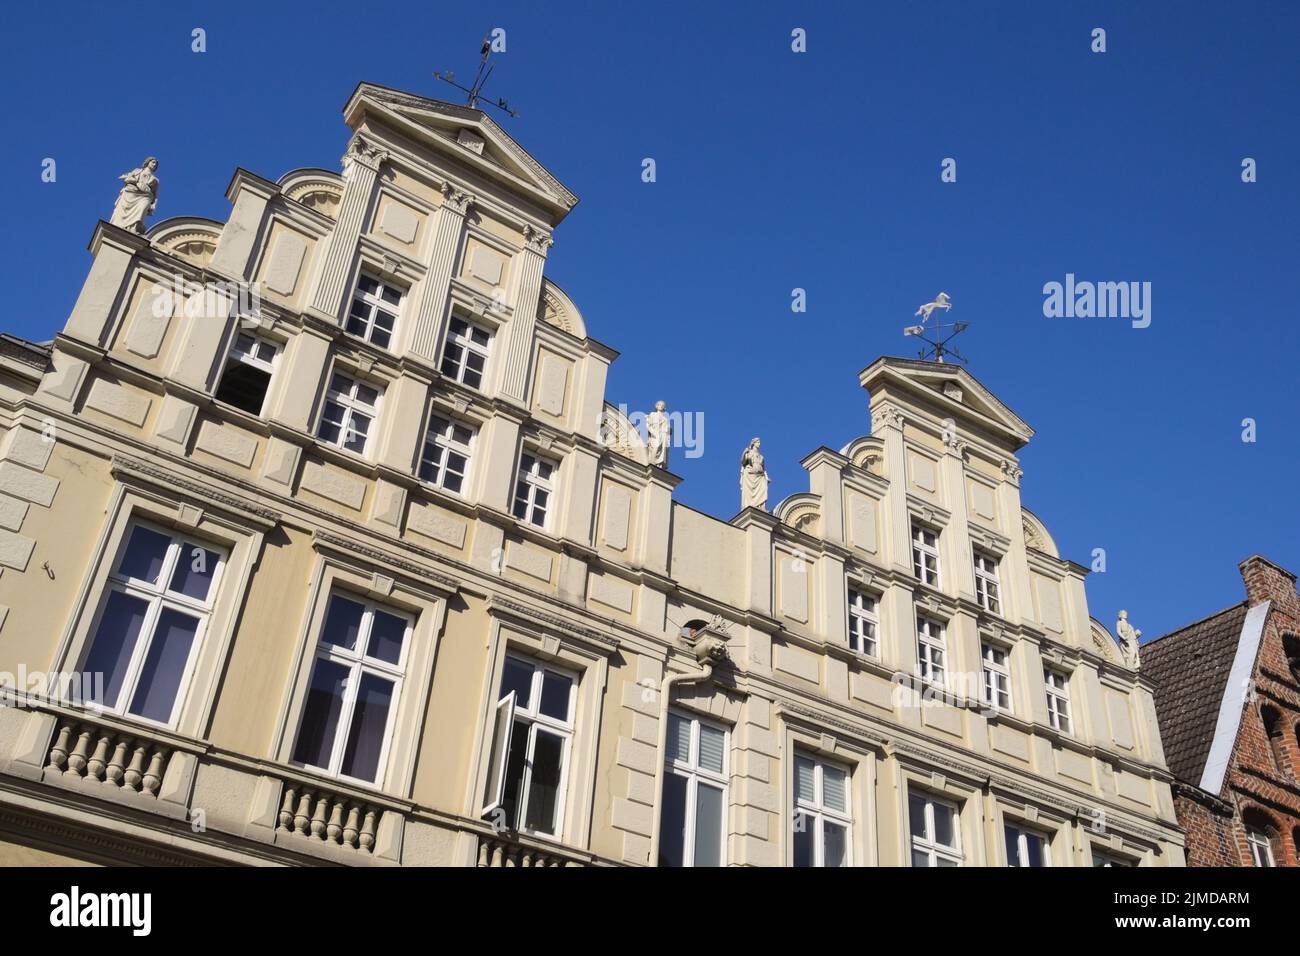 LÃ¼neburg - Classicist old town houses, Germany Stock Photo